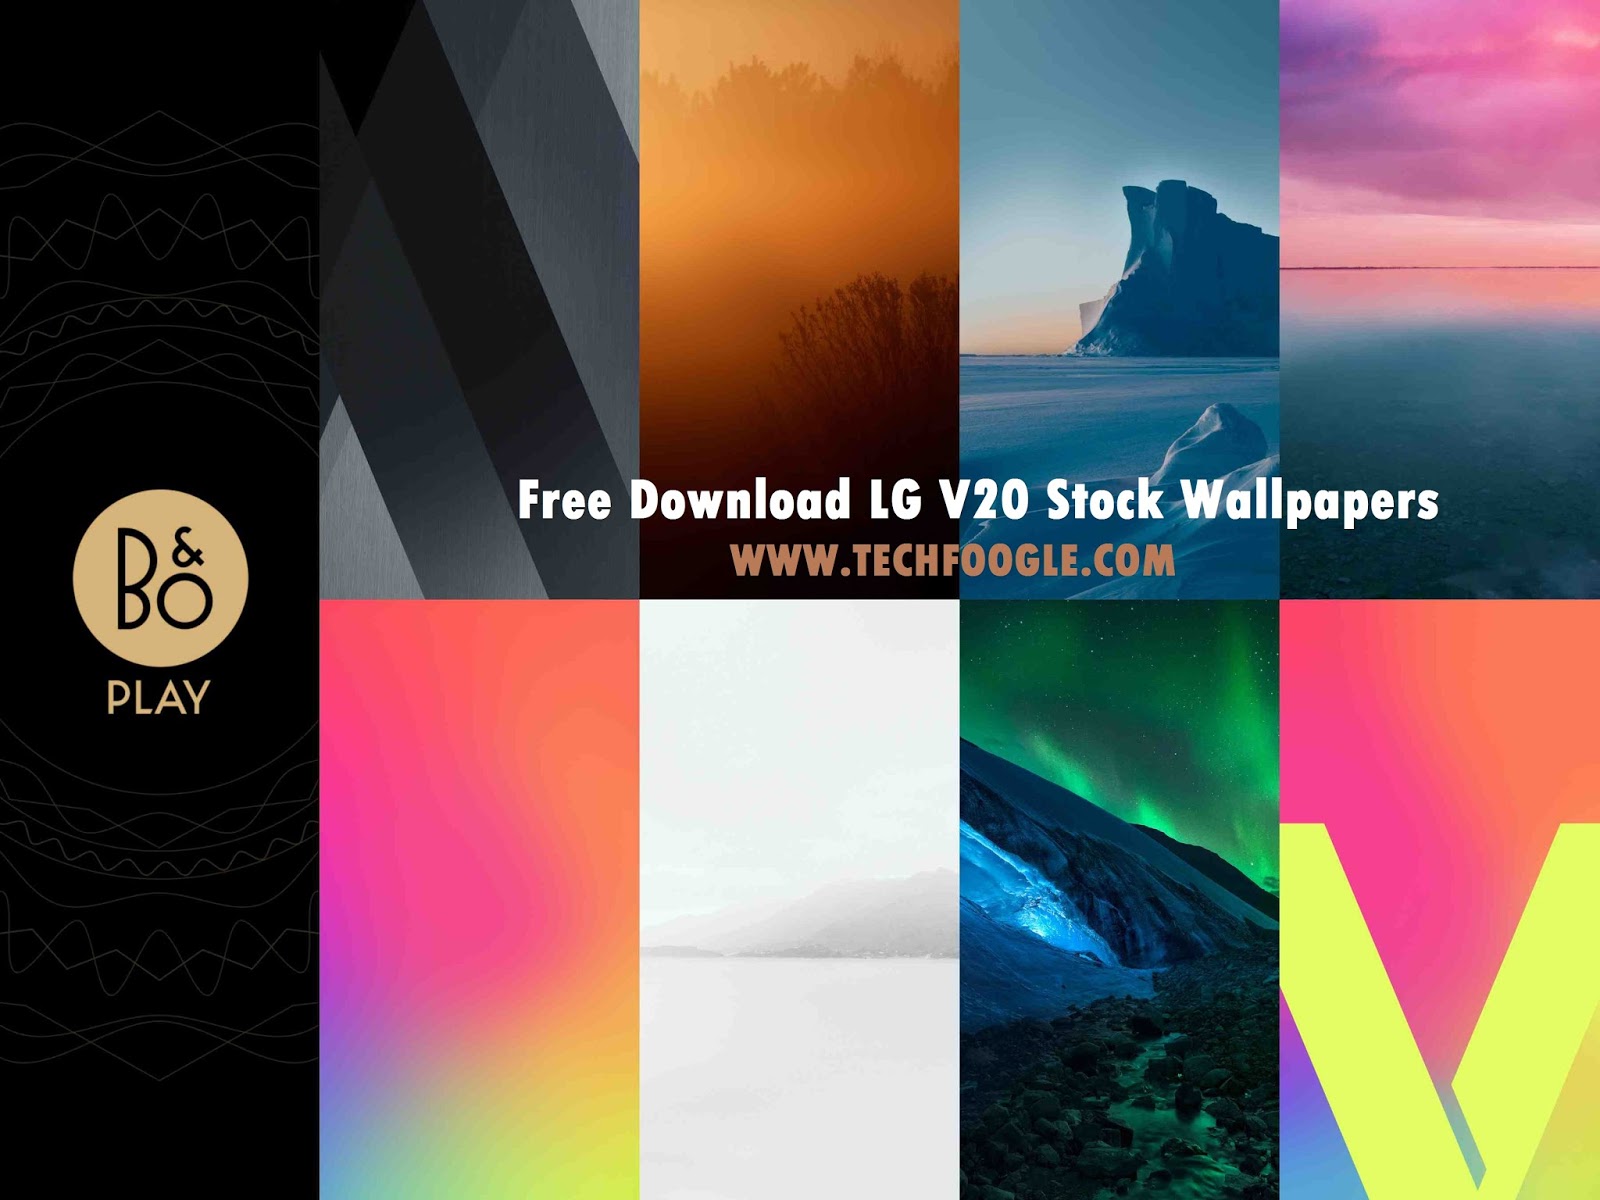 lg v20 stock wallpapers,sky,colorfulness,graphic design,atmosphere,geological phenomenon